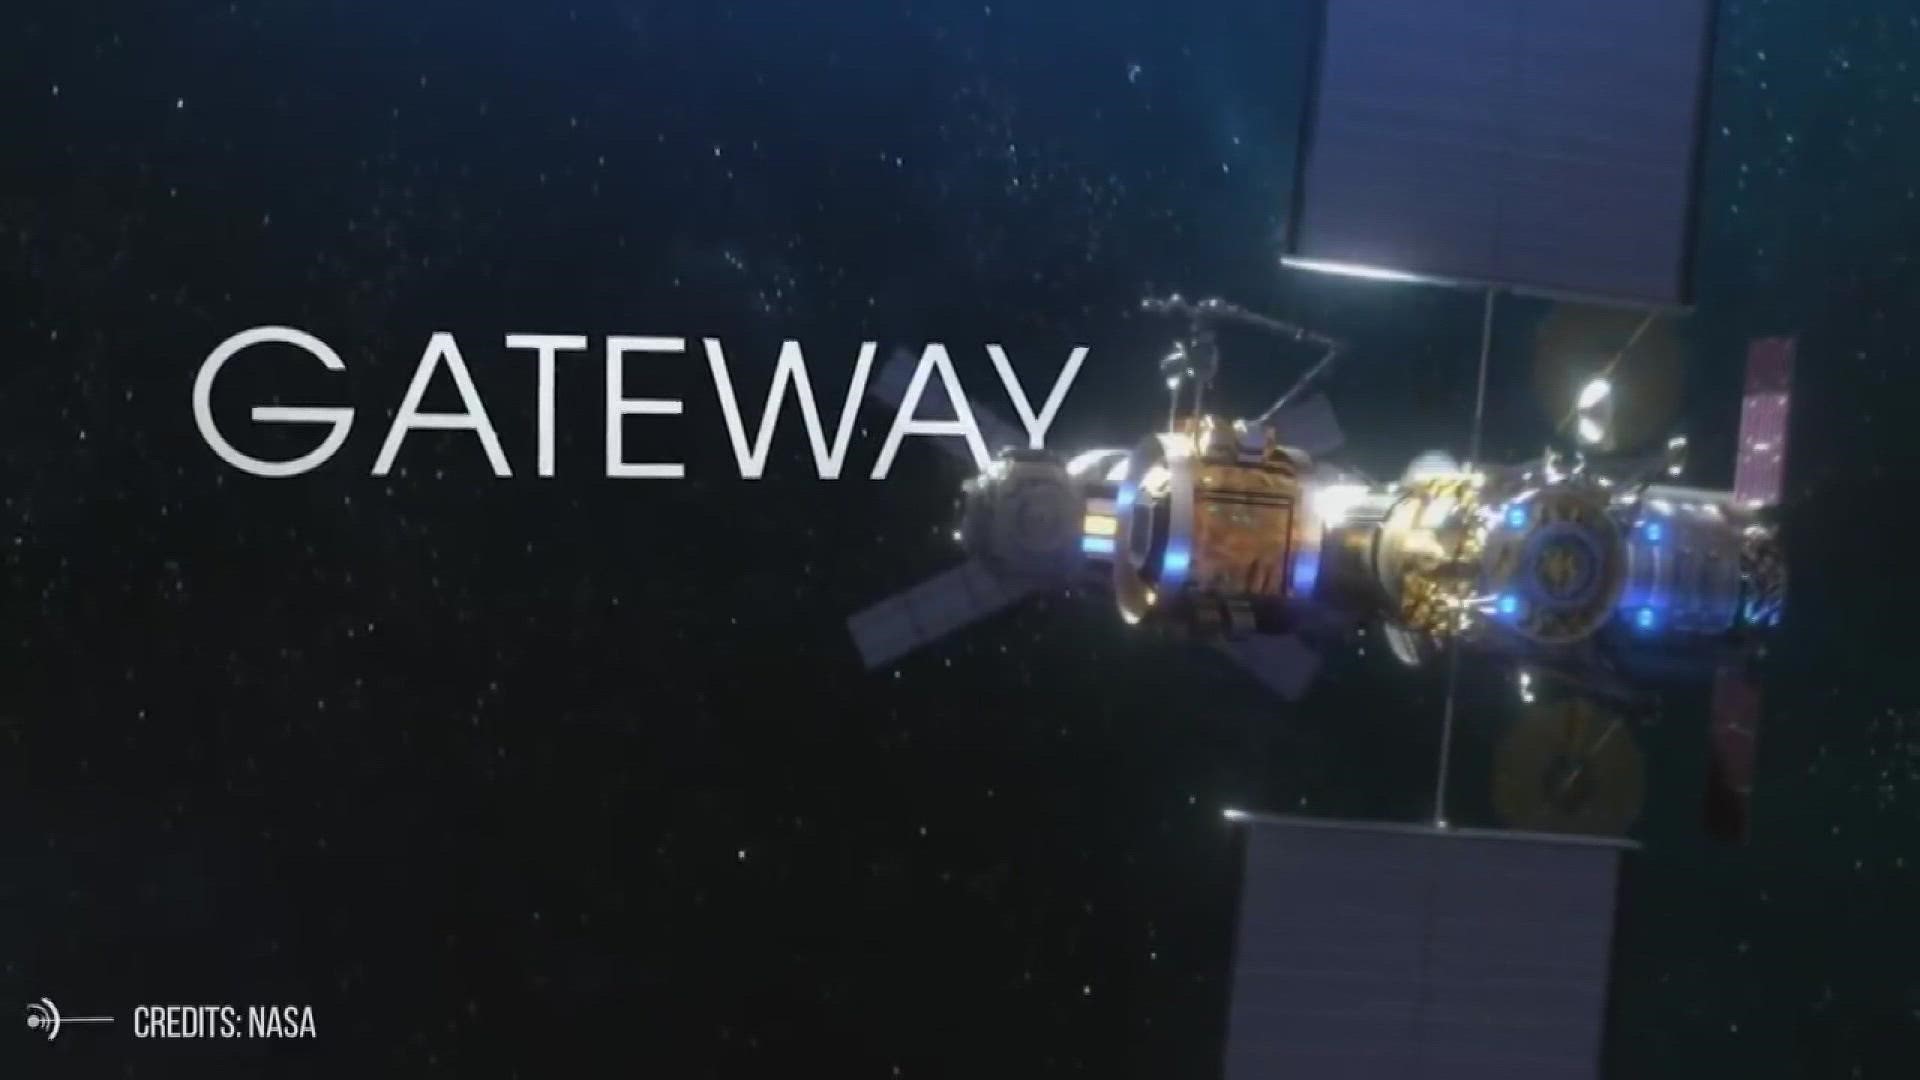 The trip to the moon for the next round of astronauts, will not be a non-stop flight. There will be a layover at a space station called Gateway.